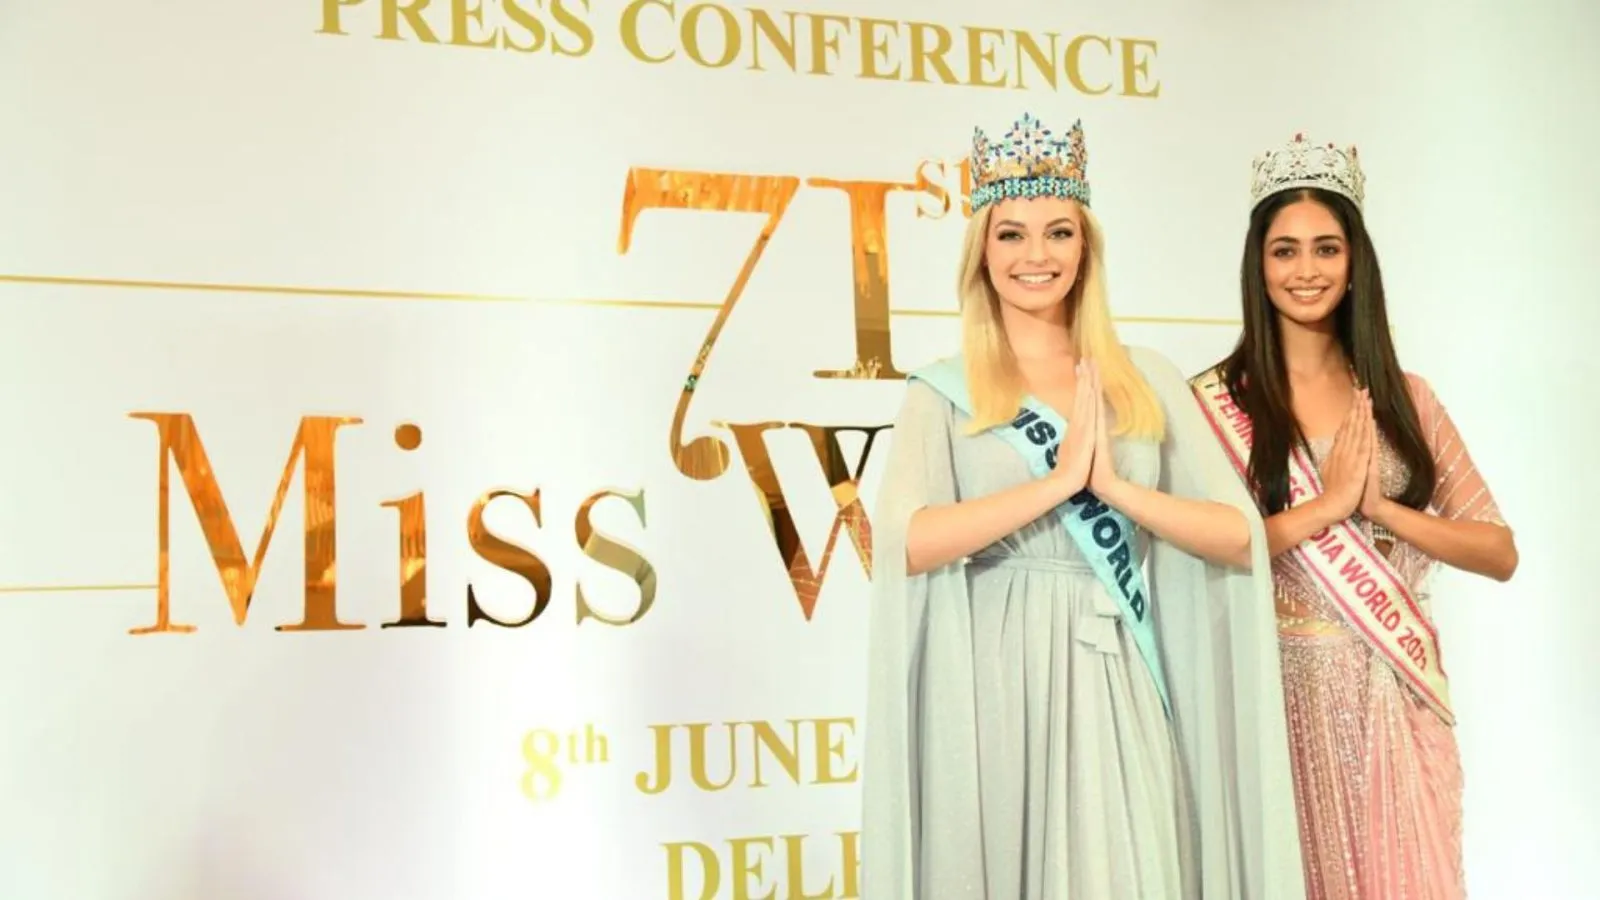 71st Miss World: India to host the pageant after 28-years